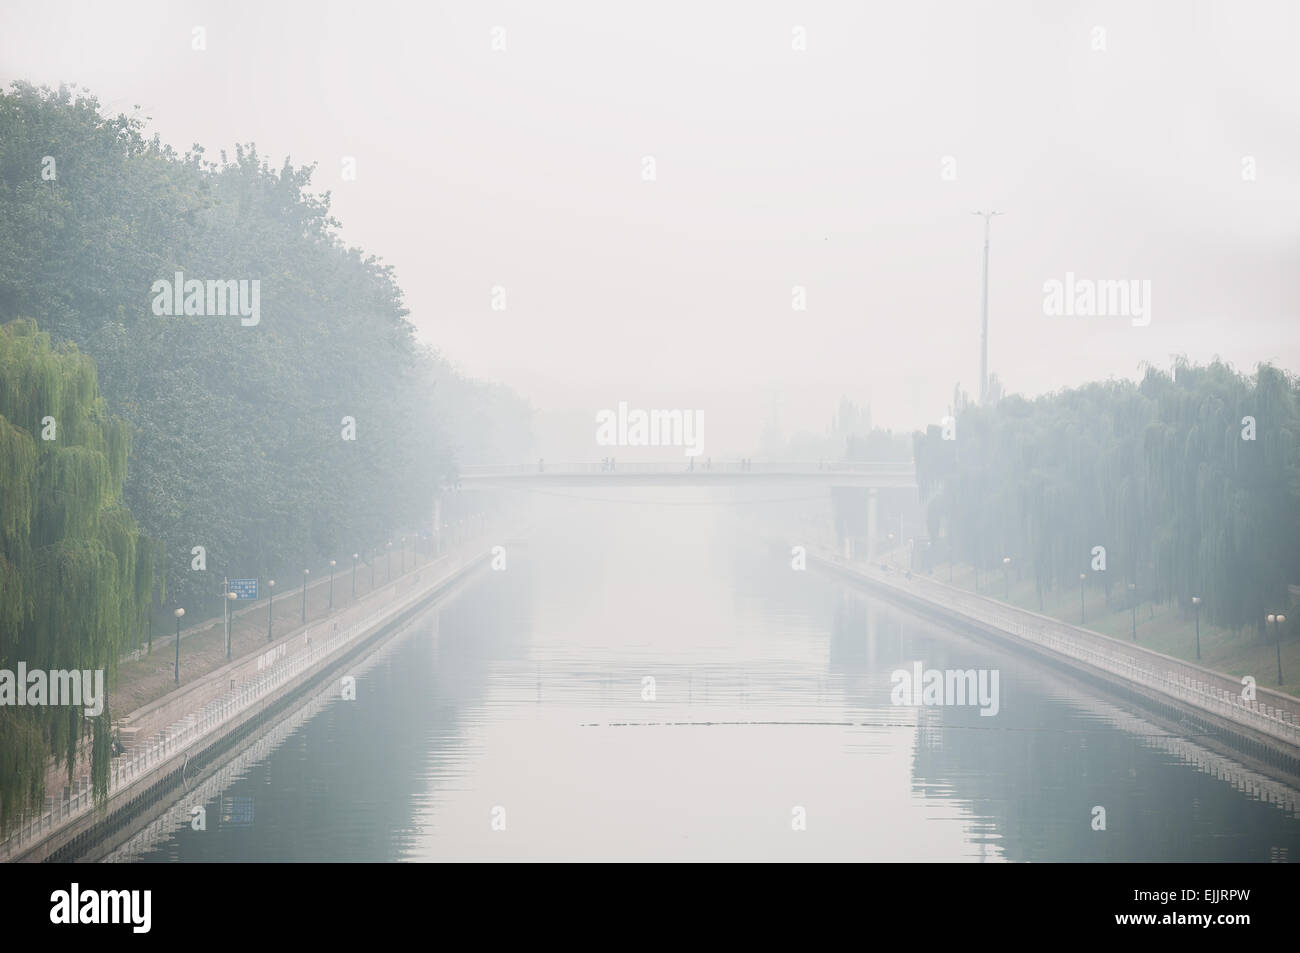 Beijing air pollution seen from a bridge overlooking a canal Stock Photo